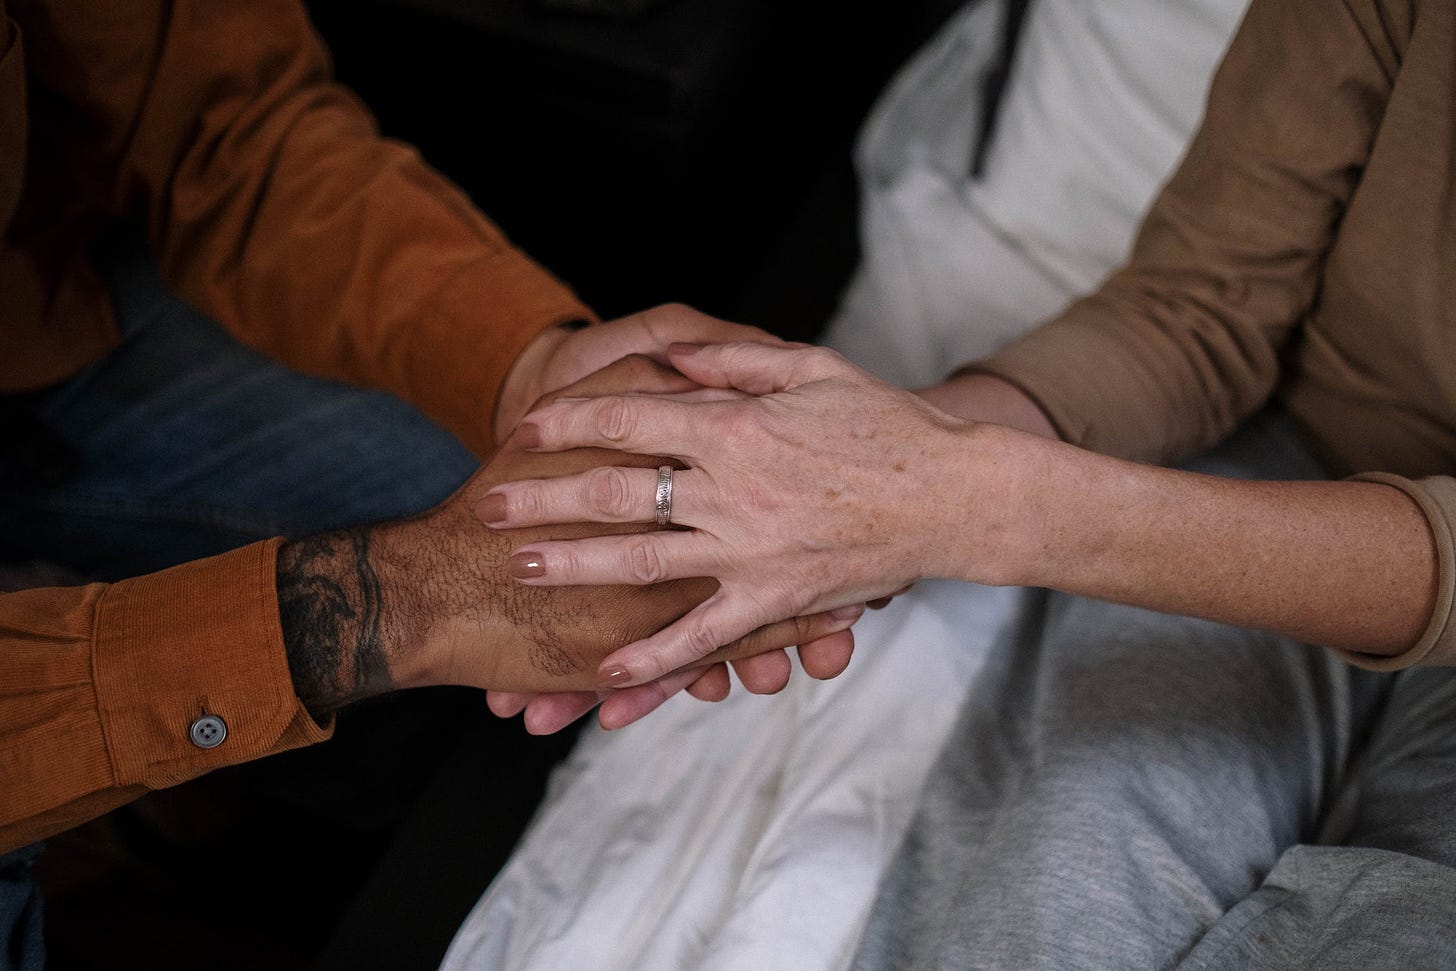 We All Need Help. Image of two people holding hands.